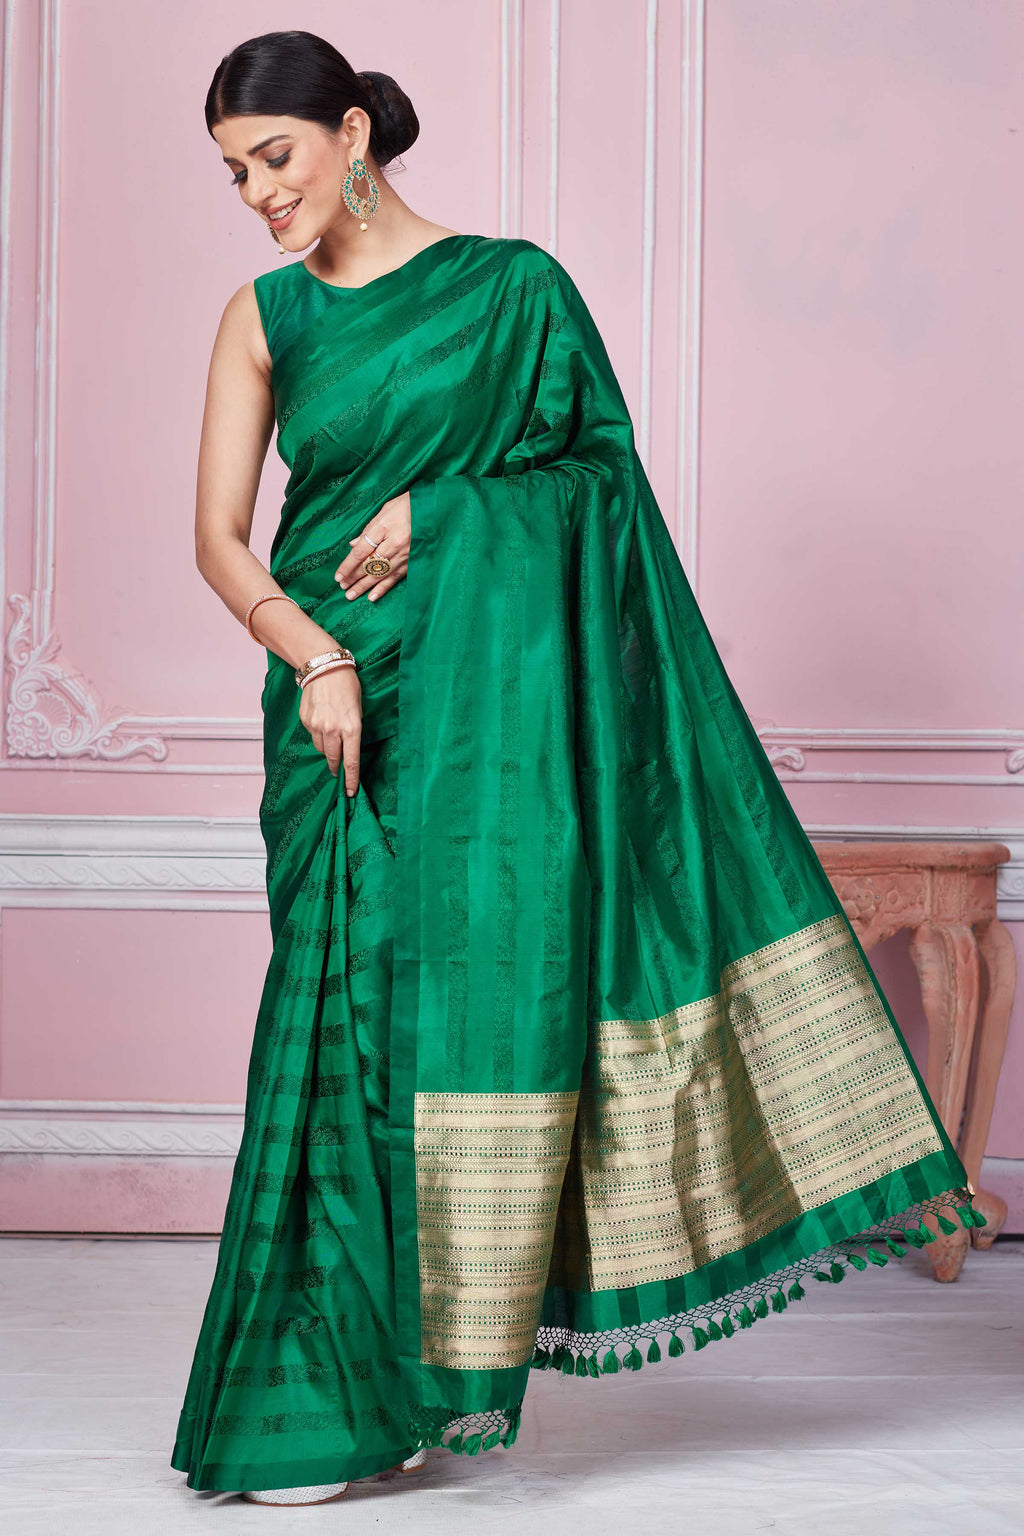 Buy bottle green self stripes Banarasi sari online in USA with zari pallu. Look your best on festive occasions in latest designer sarees, pure silk saris, Kanchipuram silk sarees, handwoven sarees, tussar silk saris, embroidered sarees from Pure Elegance Indian fashion store in USA.-full view